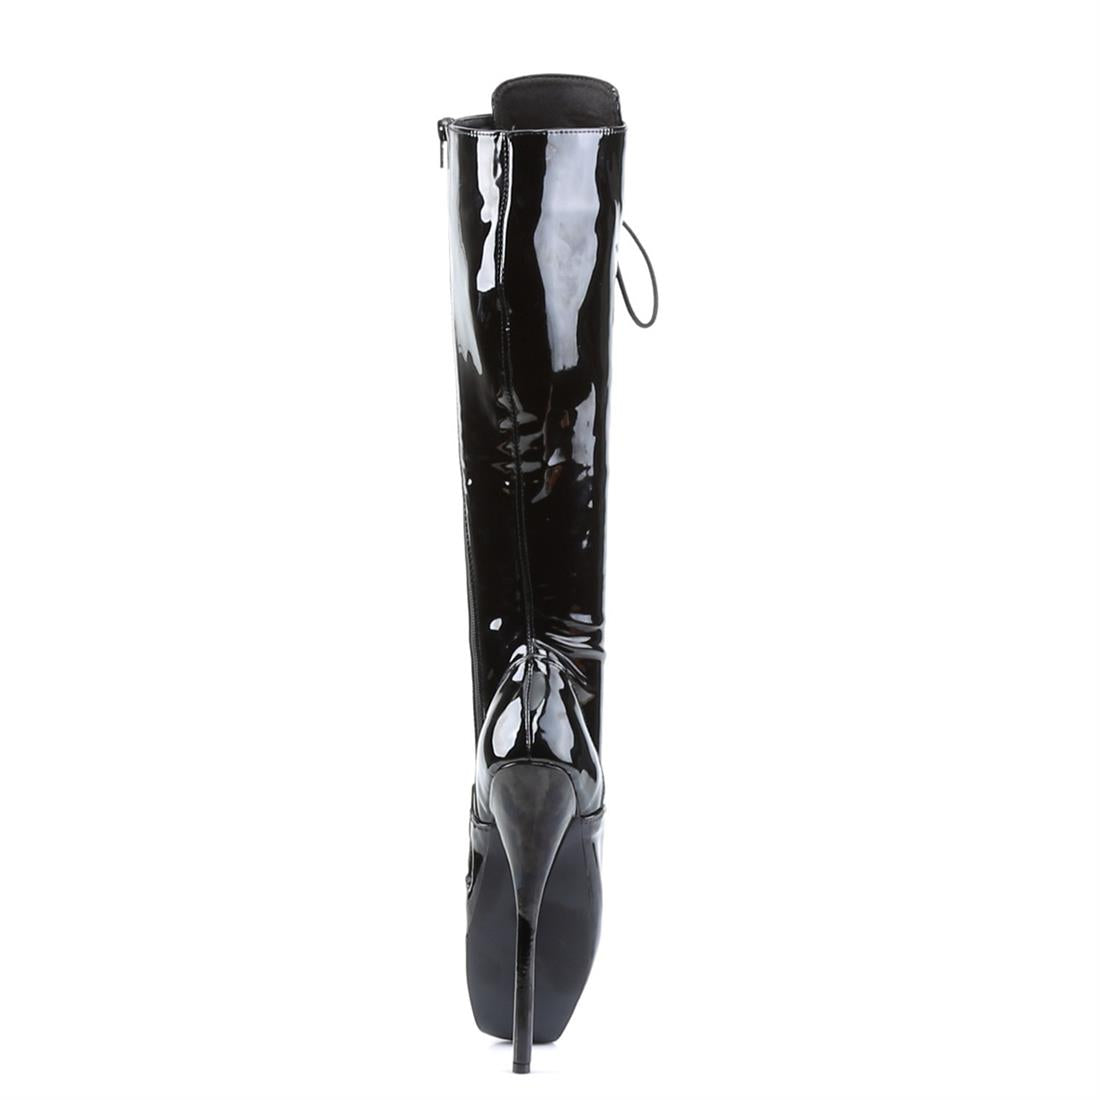 Black patent 7" Ballet Lace Up Knee High Boot, rear view.